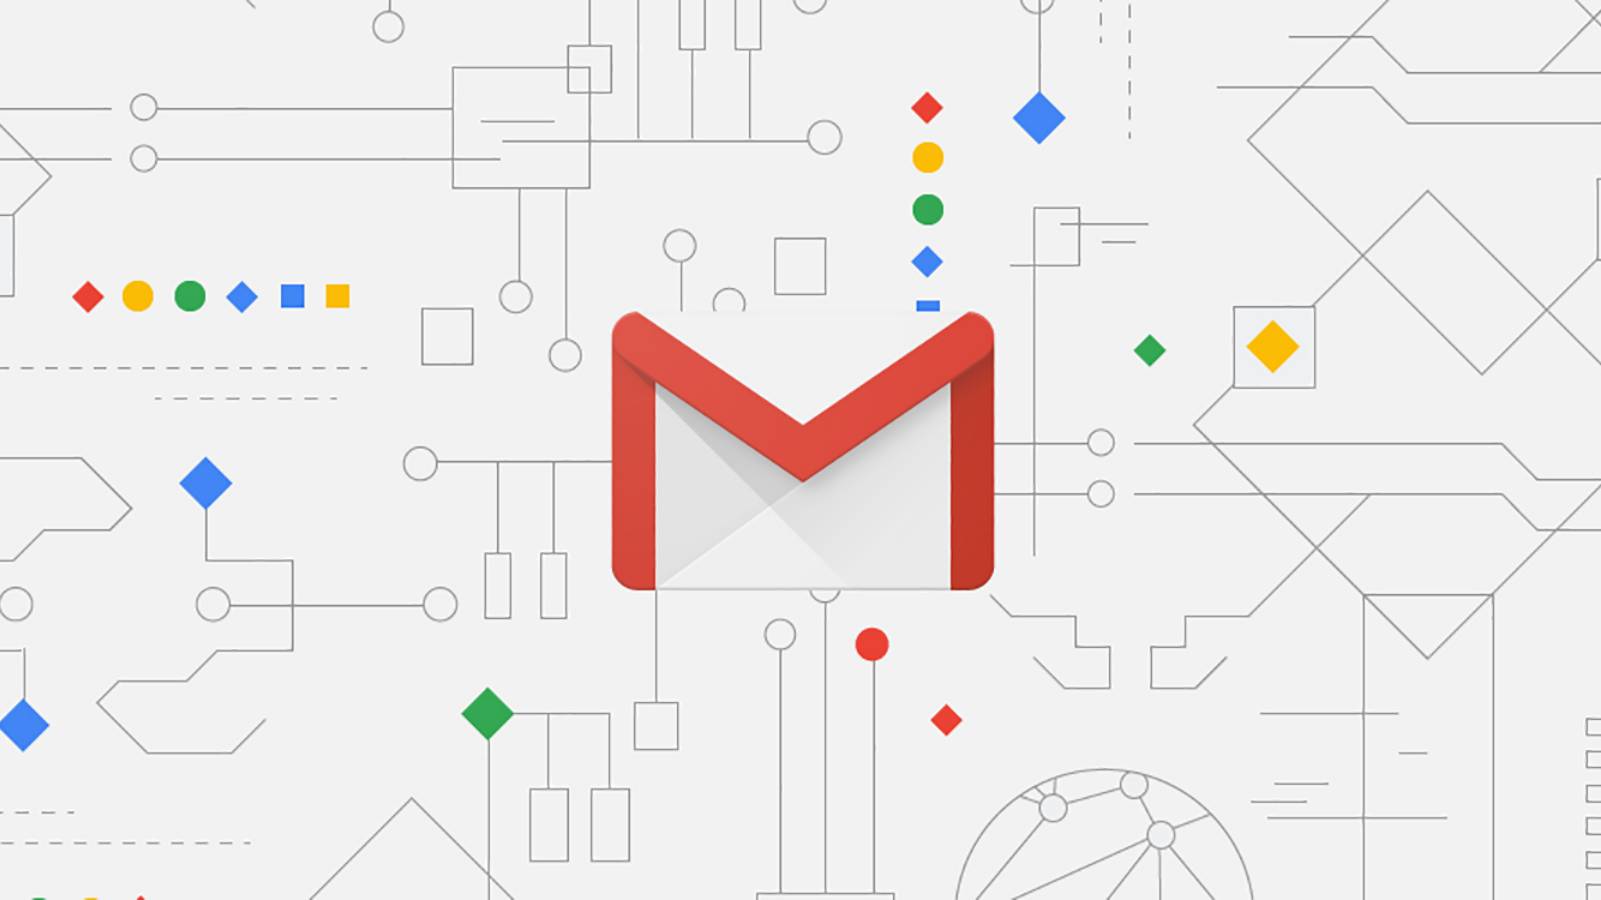 The New GMAIL Function Expected for YEARS and DAYS on Phones